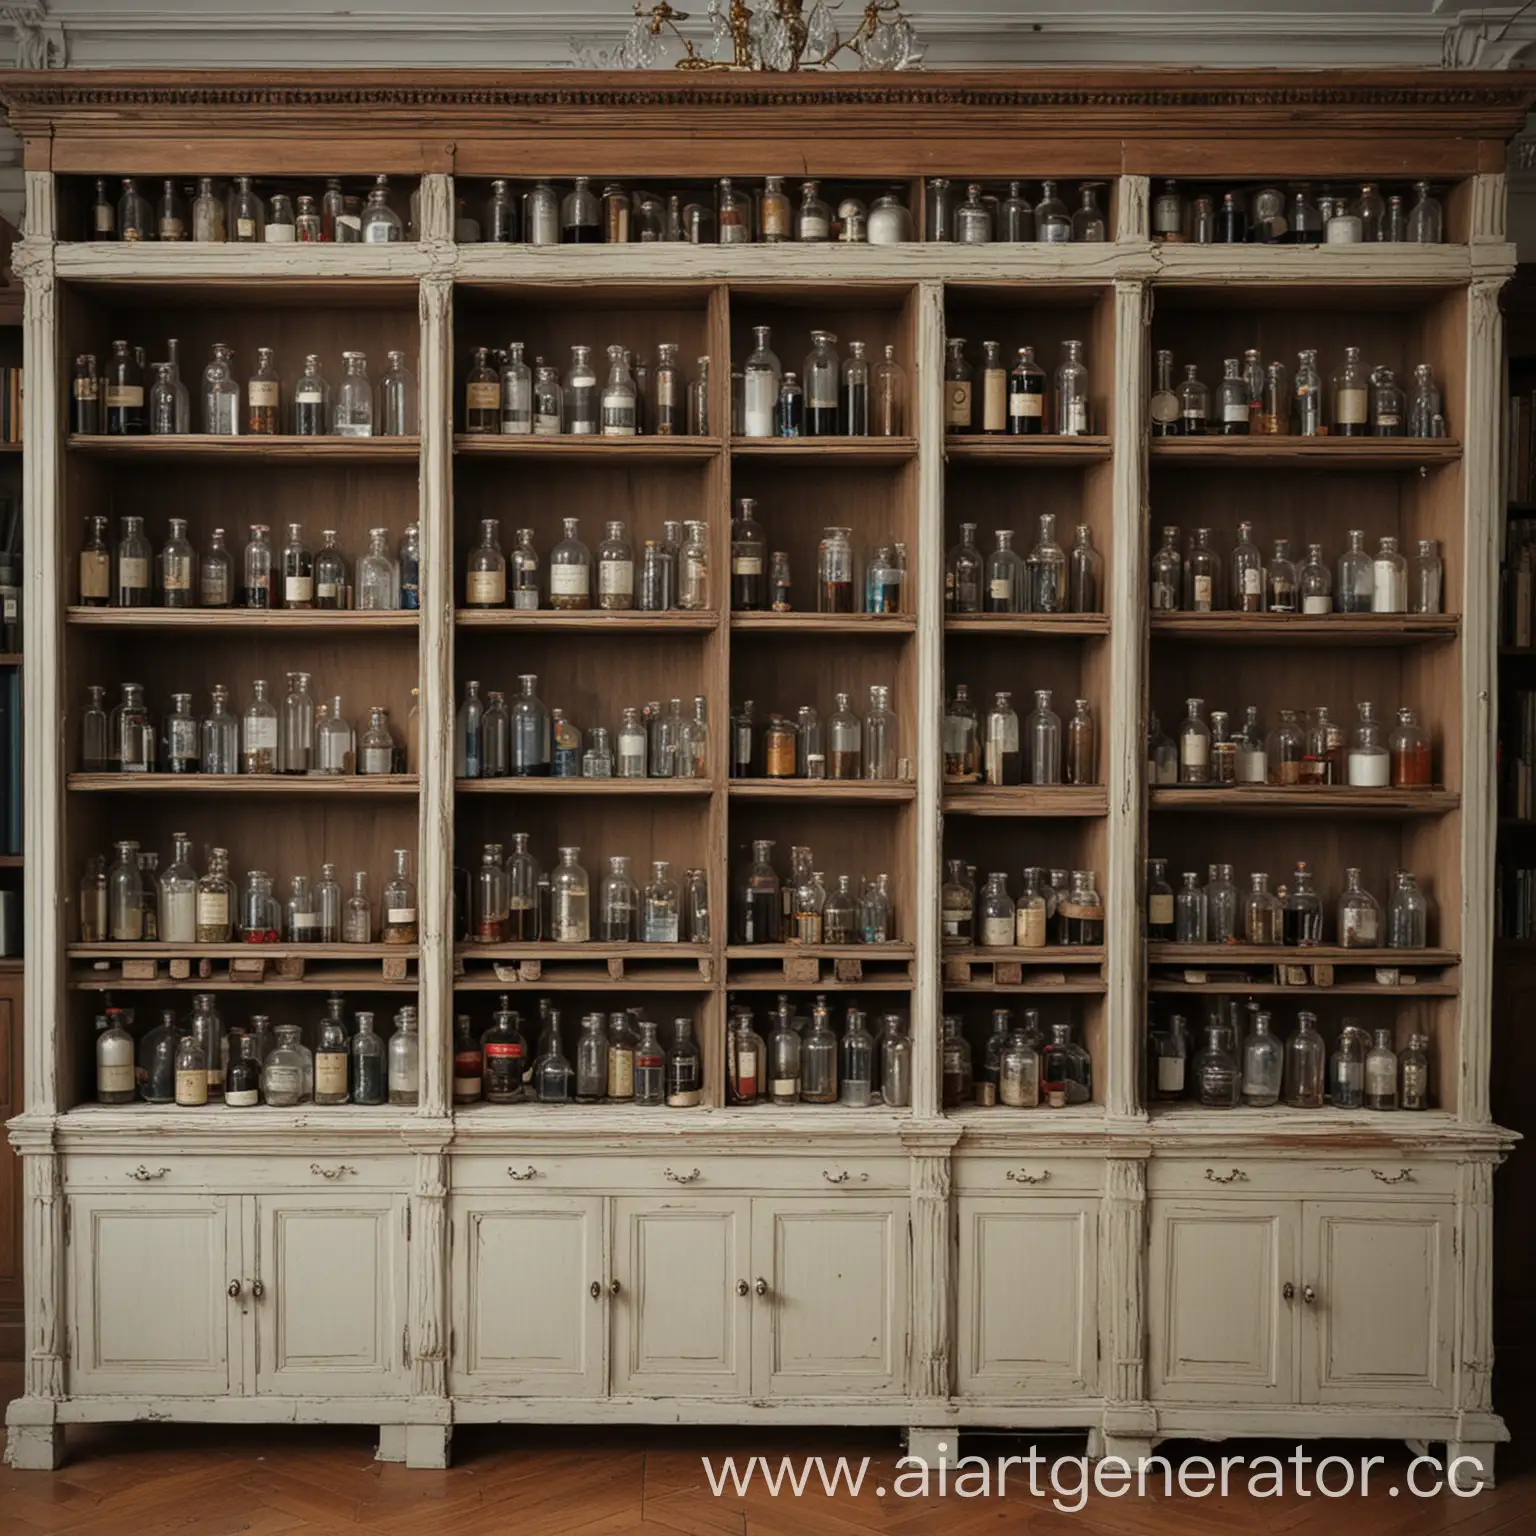 Scientists-Laboratory-Cabinet-with-Assorted-Equipment-and-Specimens